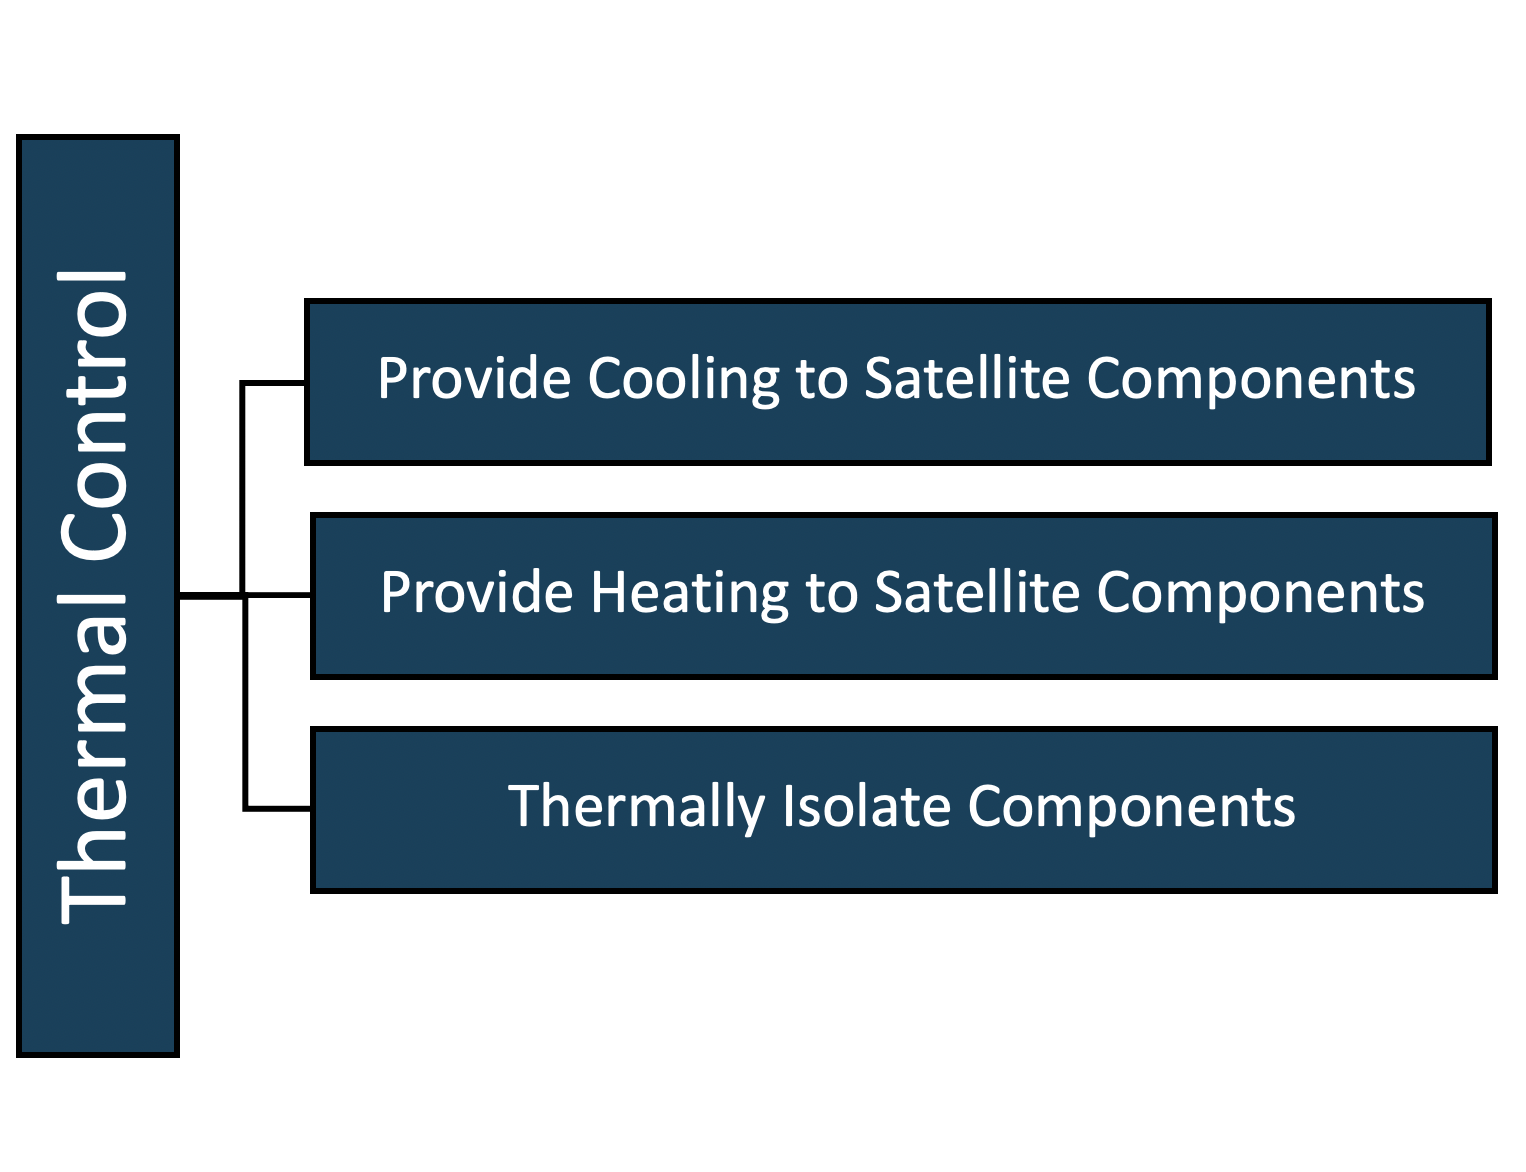 Thermal Control
                    Provide Cooling to Satellite Components
                    Provide Heating to Satellite Components
                    Thermally Isolate Components
                